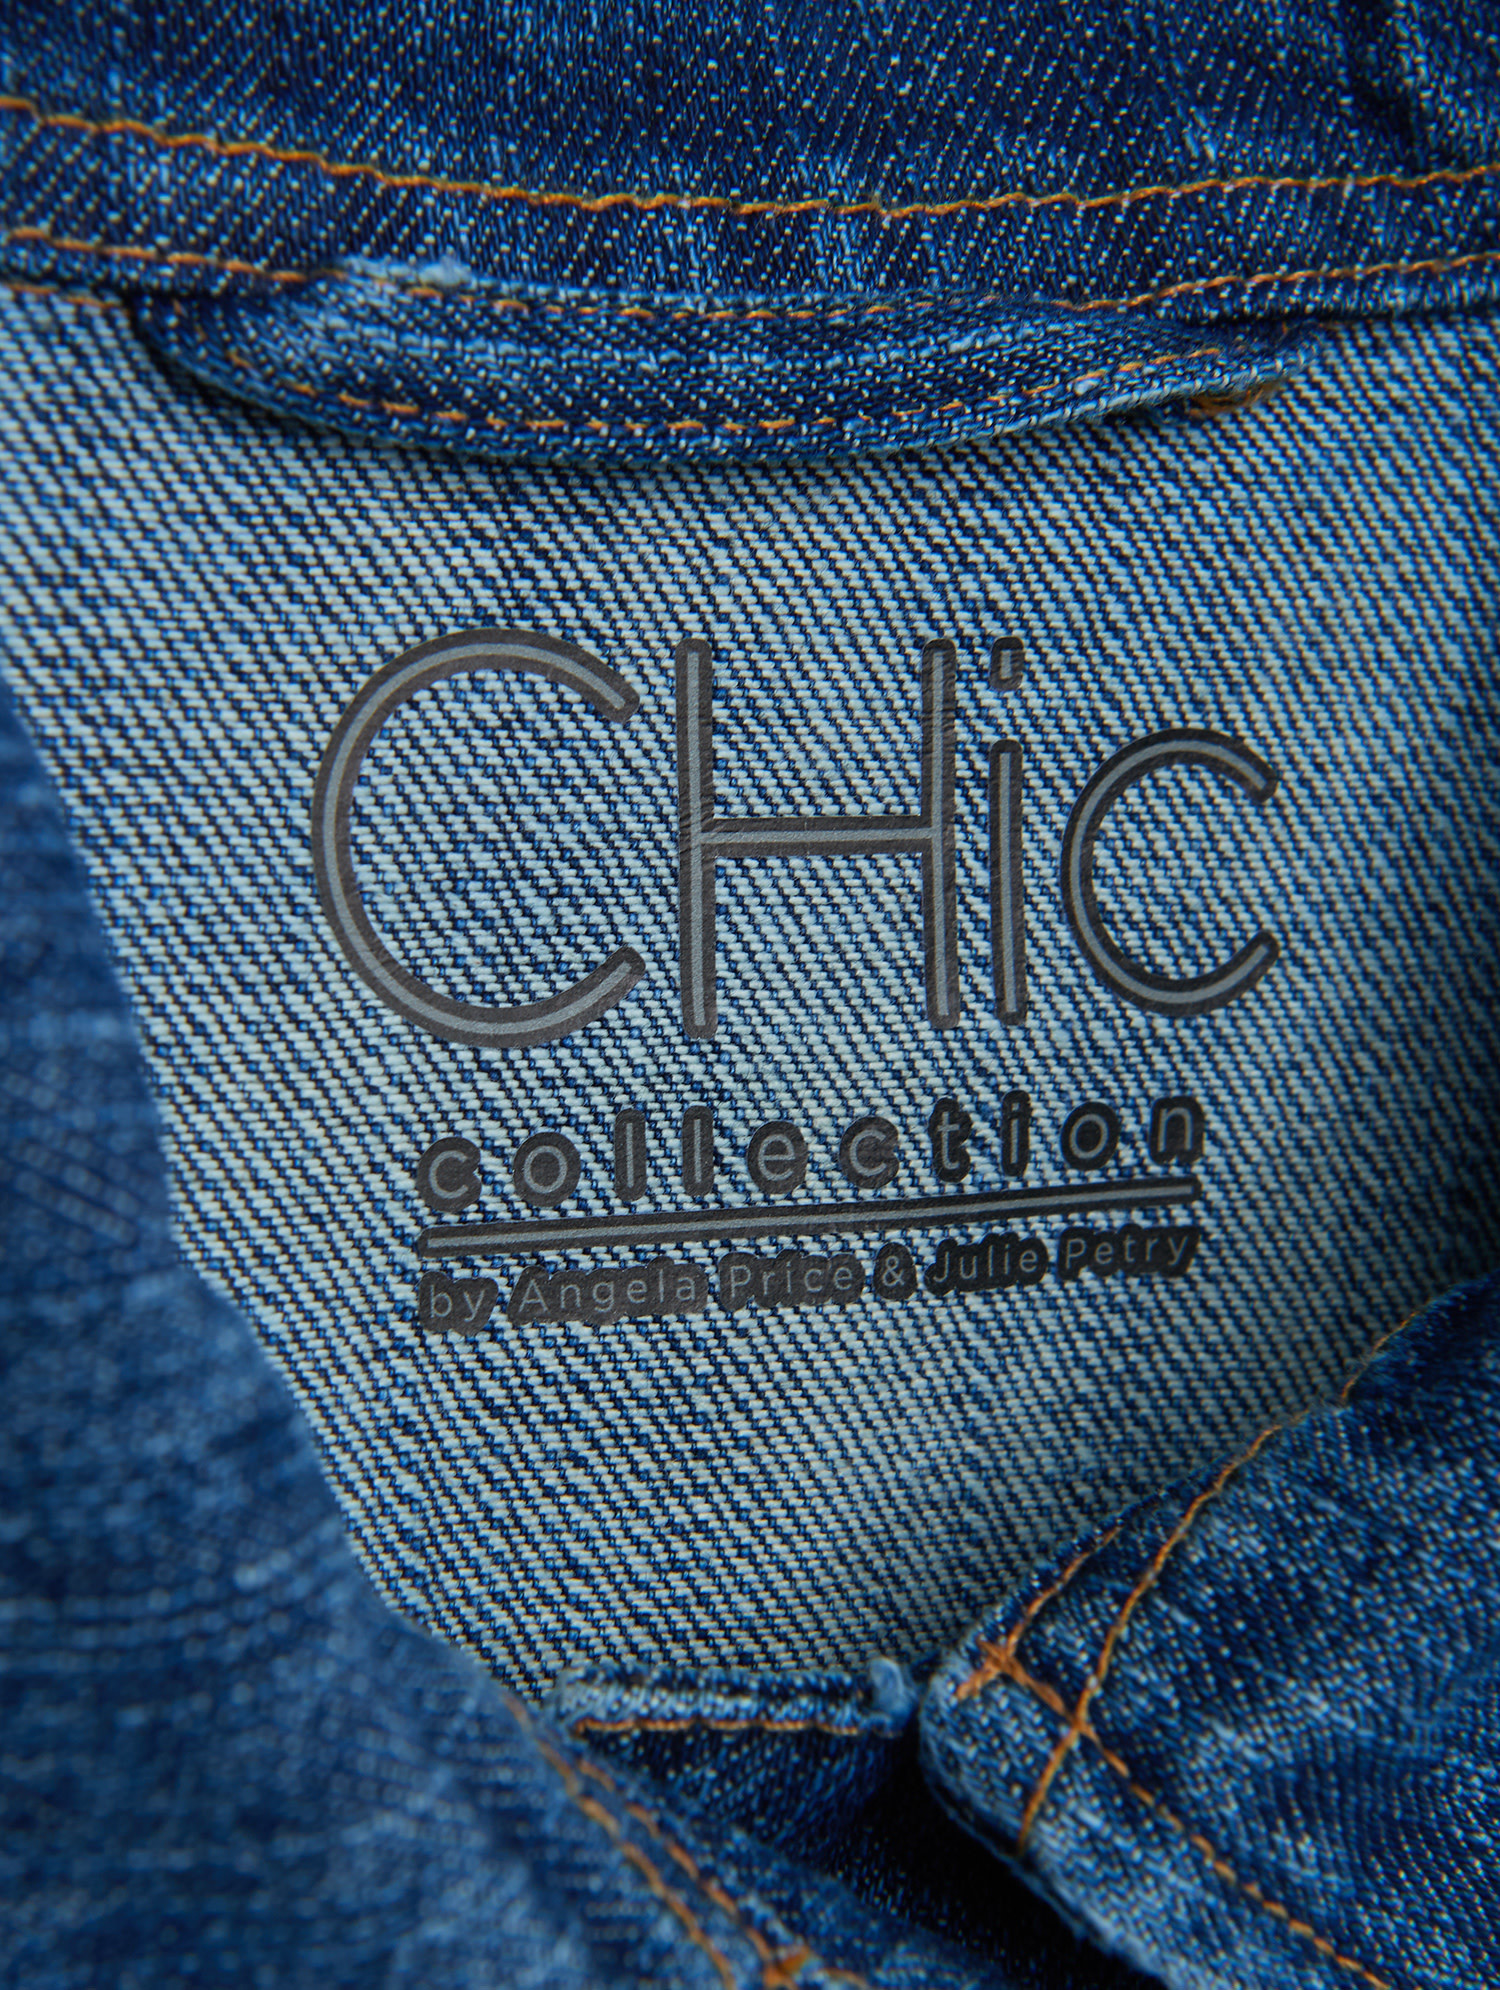 Chic Jeans Size Chart